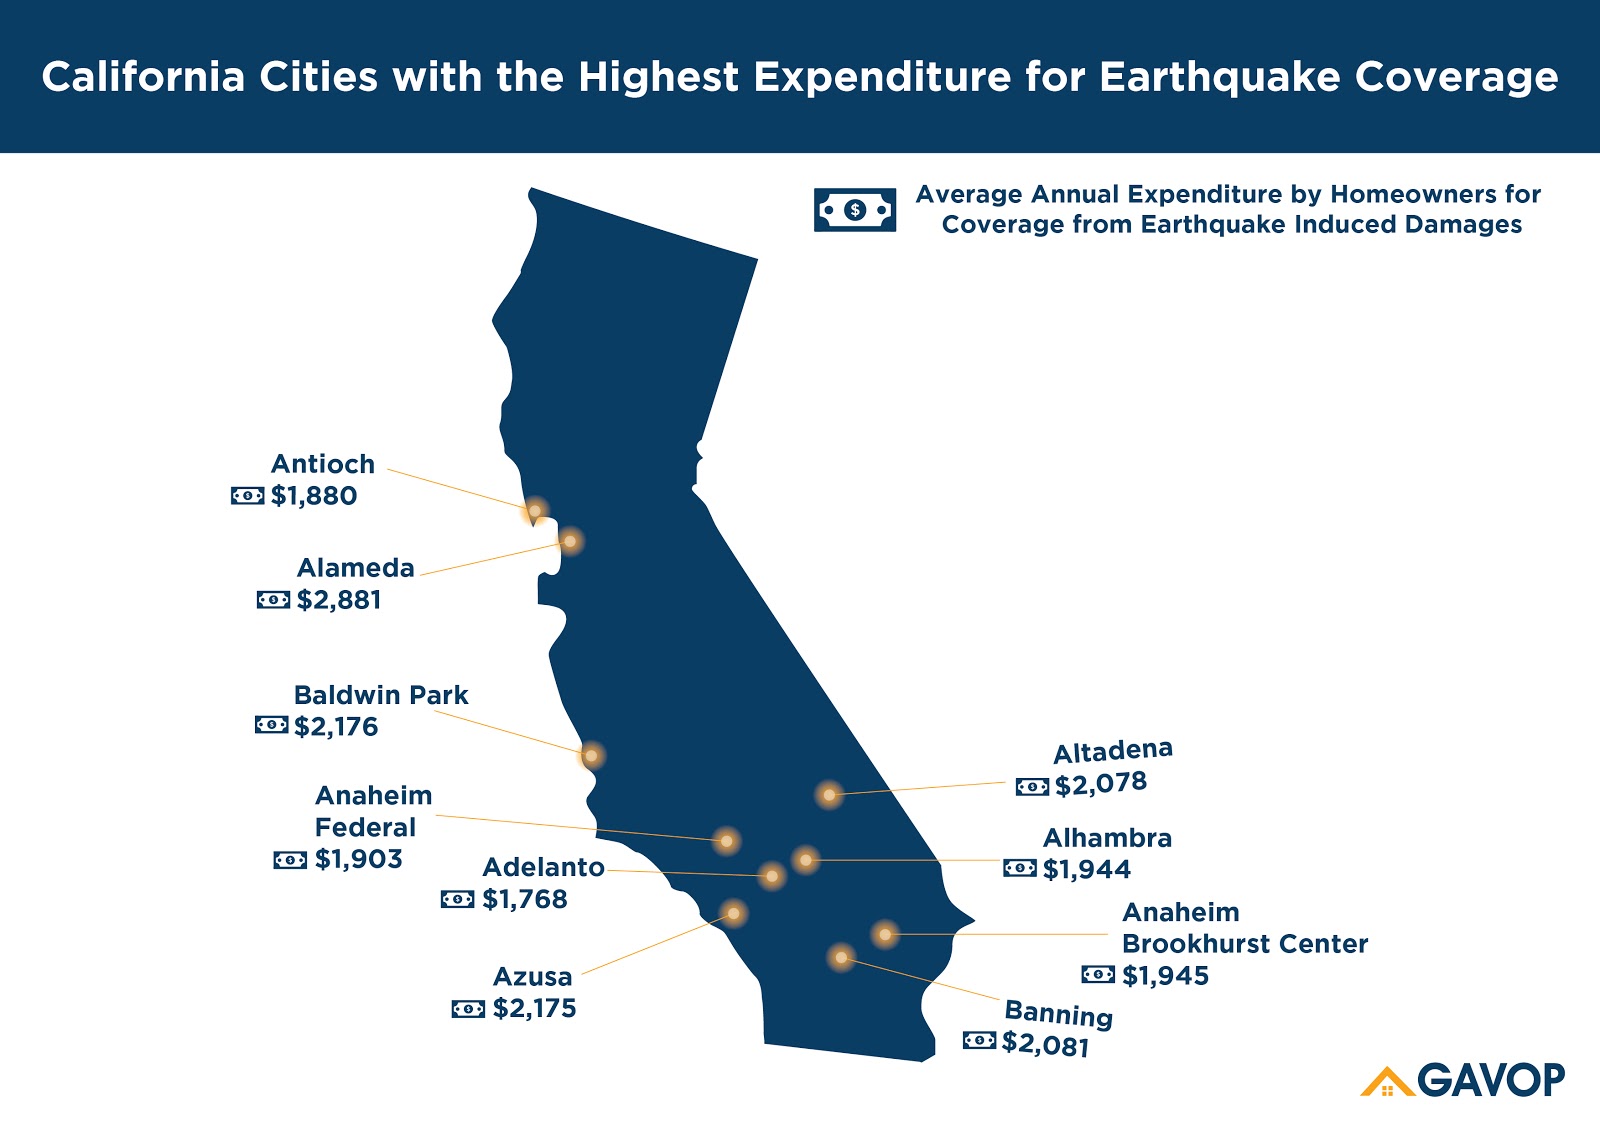 Home Insurance in California Increases by About 2,800 to Cover Earthquake Damage